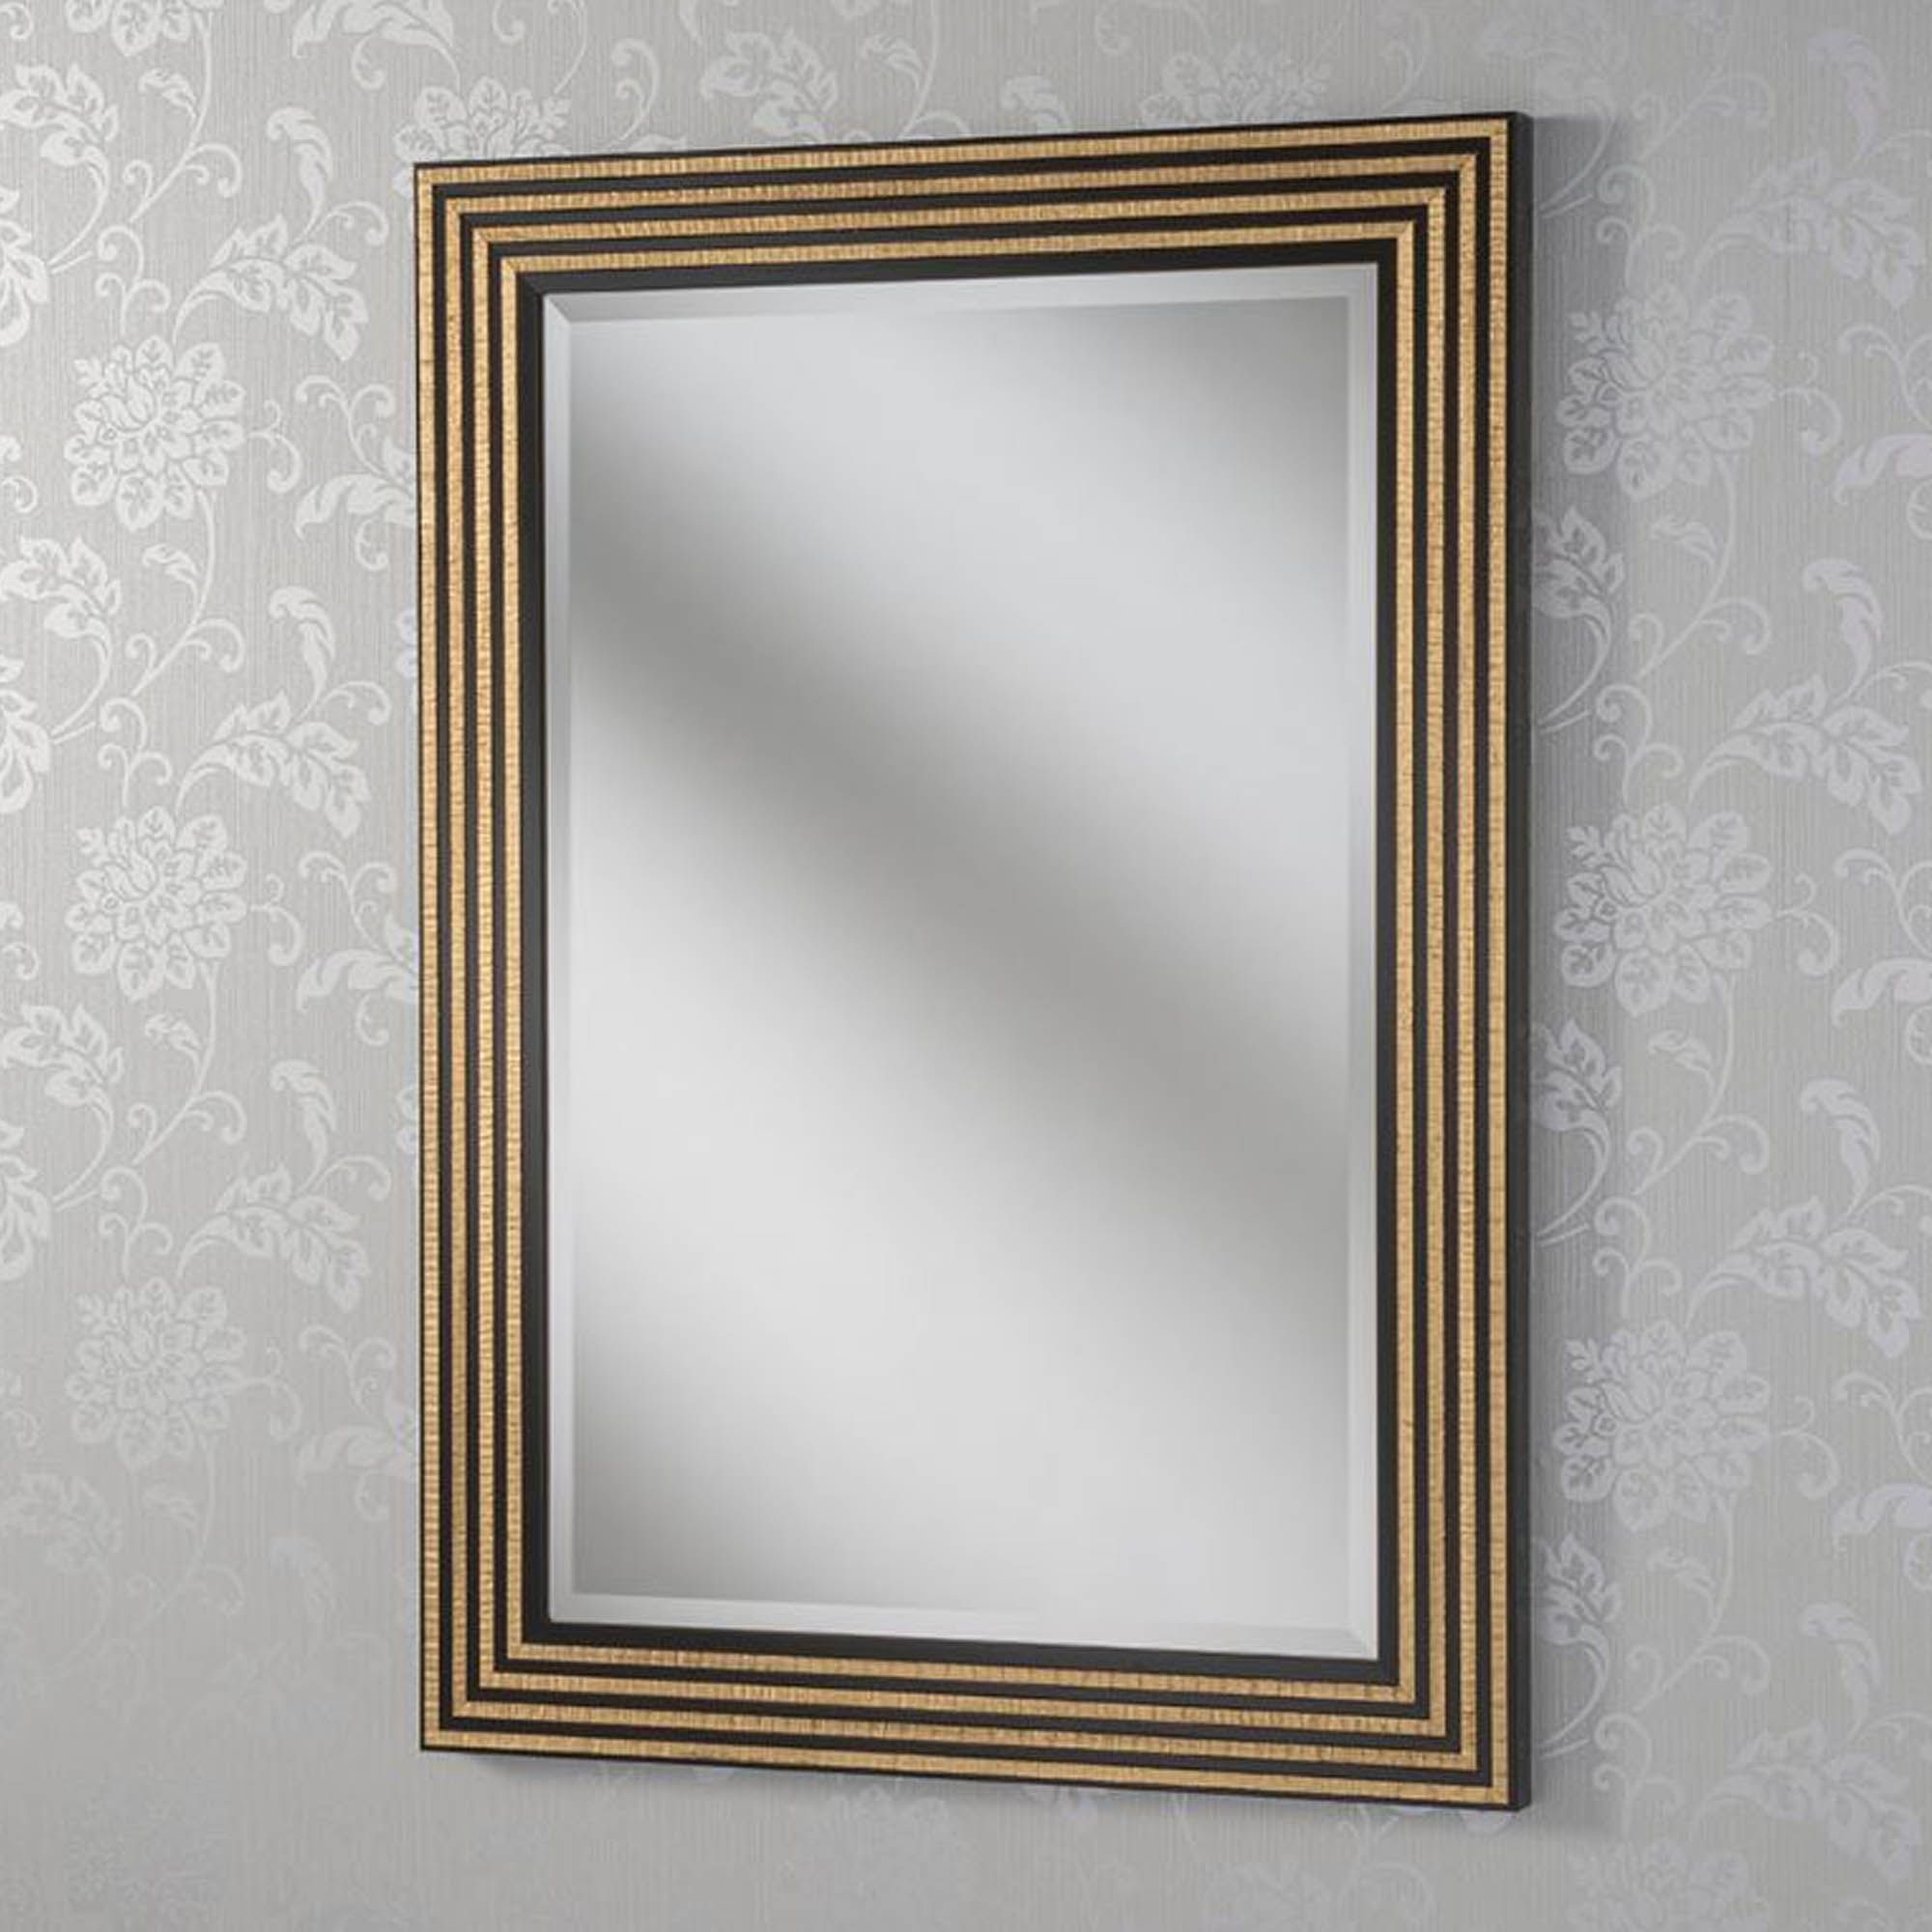 Black And Gold Line Rectangular Wall Mirror Intended For Well Known Black And Gold Wall Mirrors (View 3 of 20)